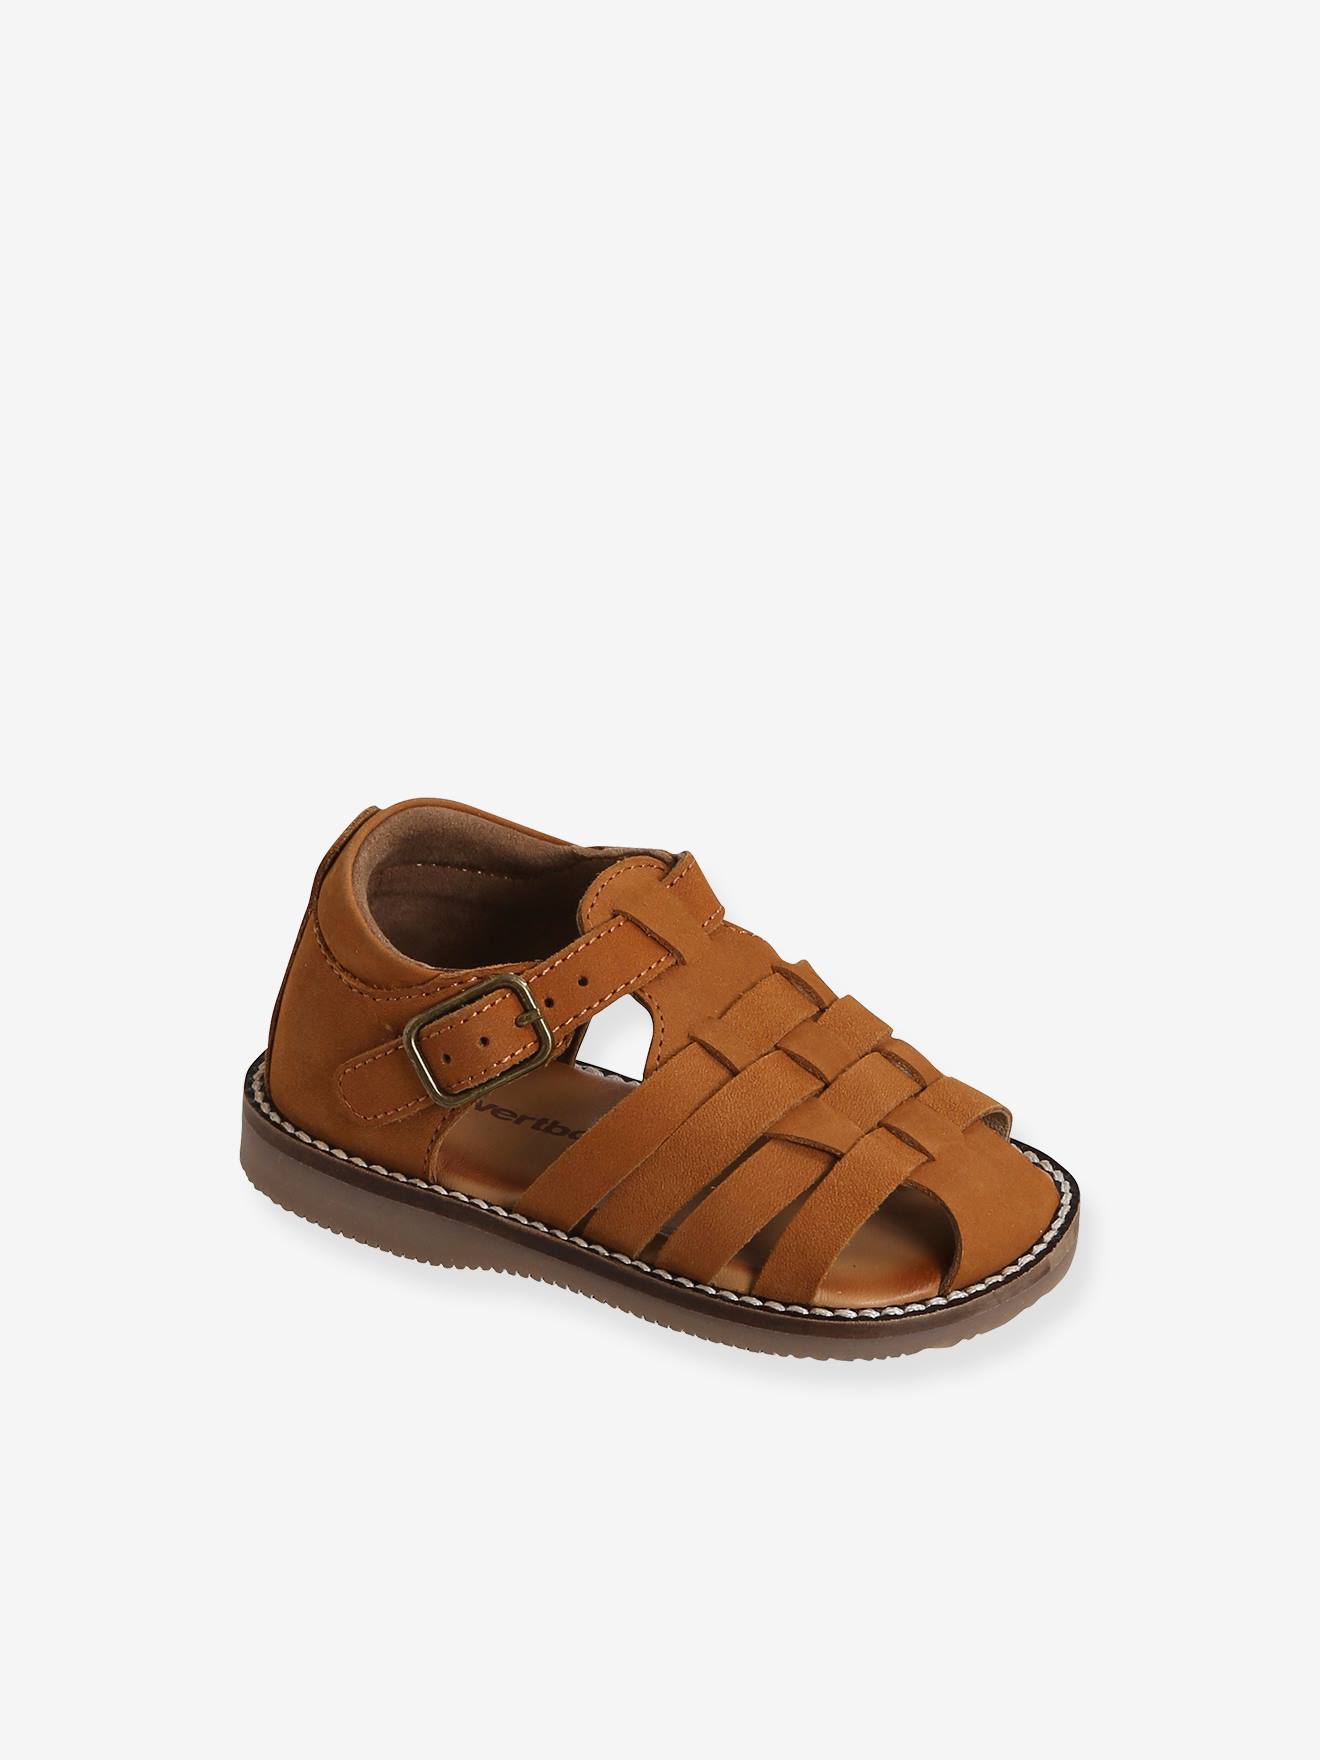 Henry Baby Boys Vintage Inspired Caged Leather Sandal - Classic Baby Boys  Sandal – Petit Foot